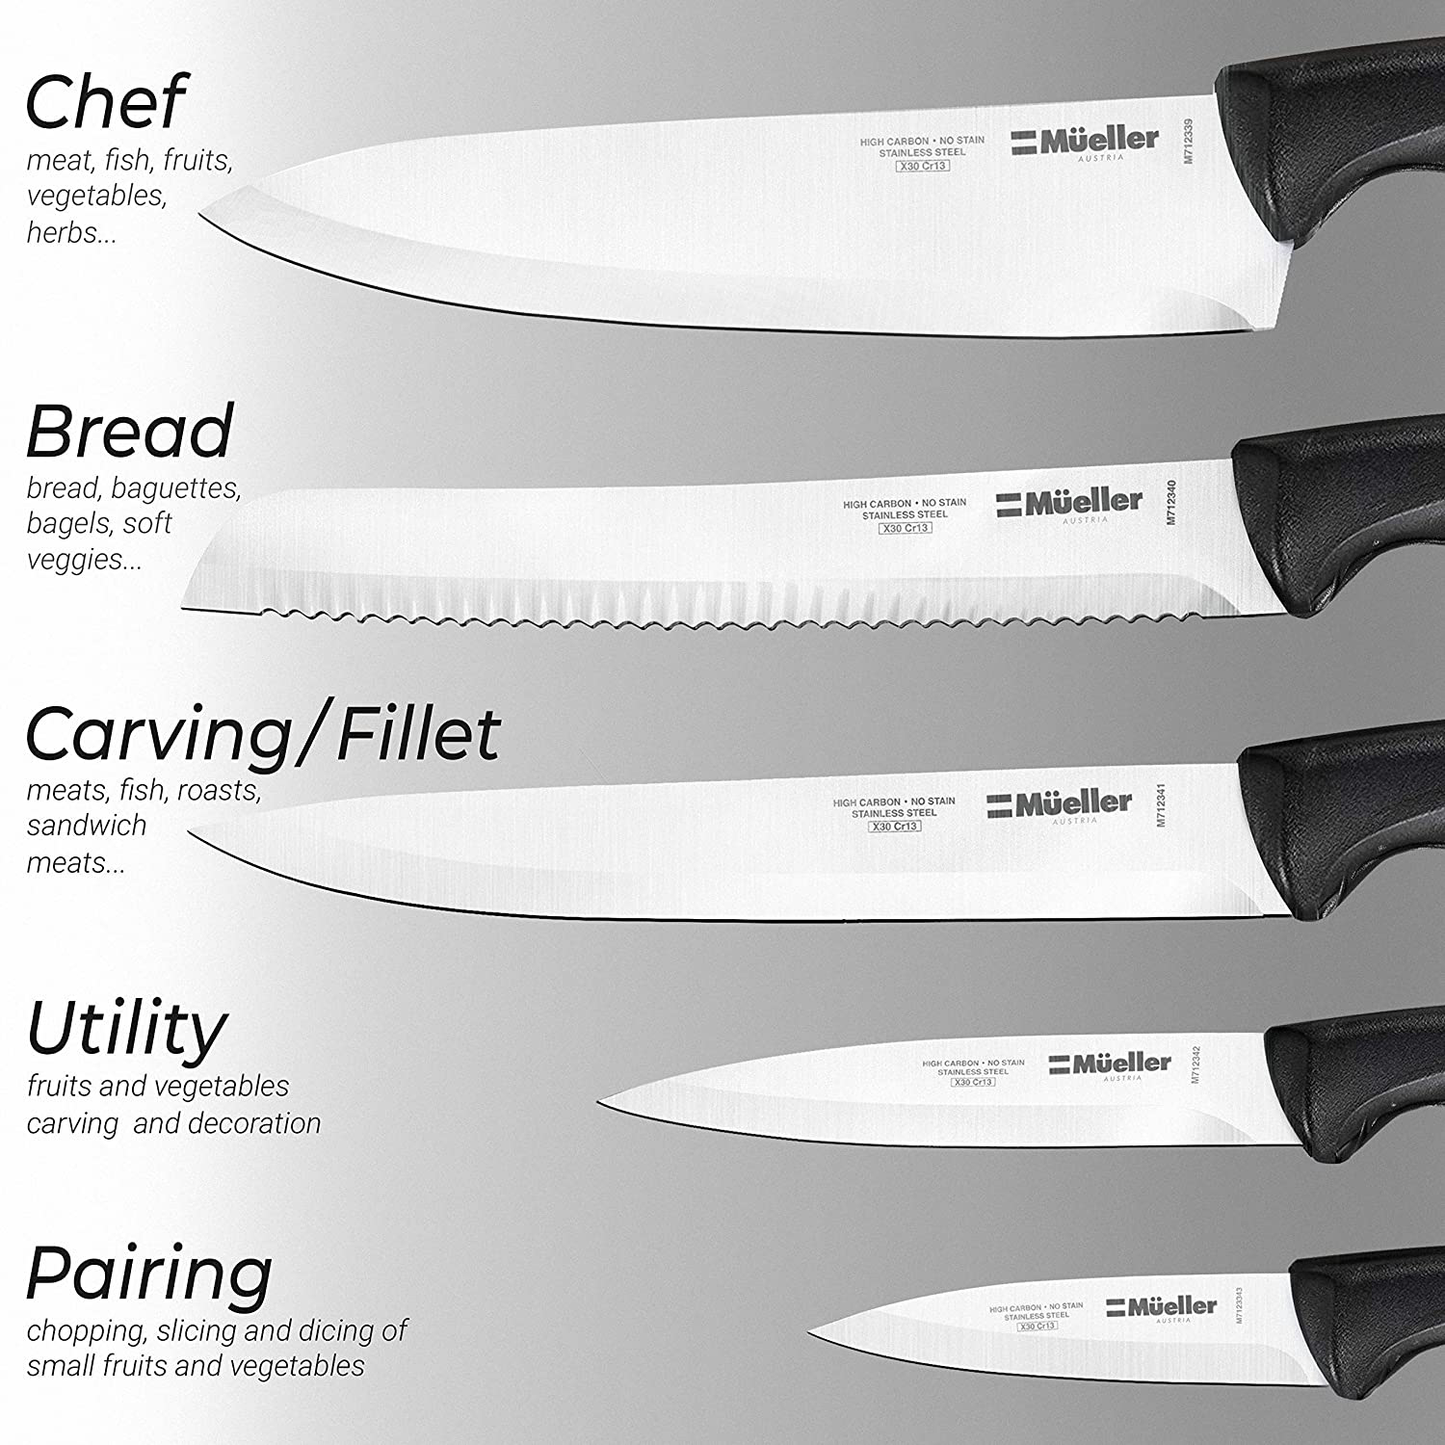 7-Piece Ultra Sharp Deluxe Stainless Steel Pro Kitchen Knife Set with Acrylic Stand